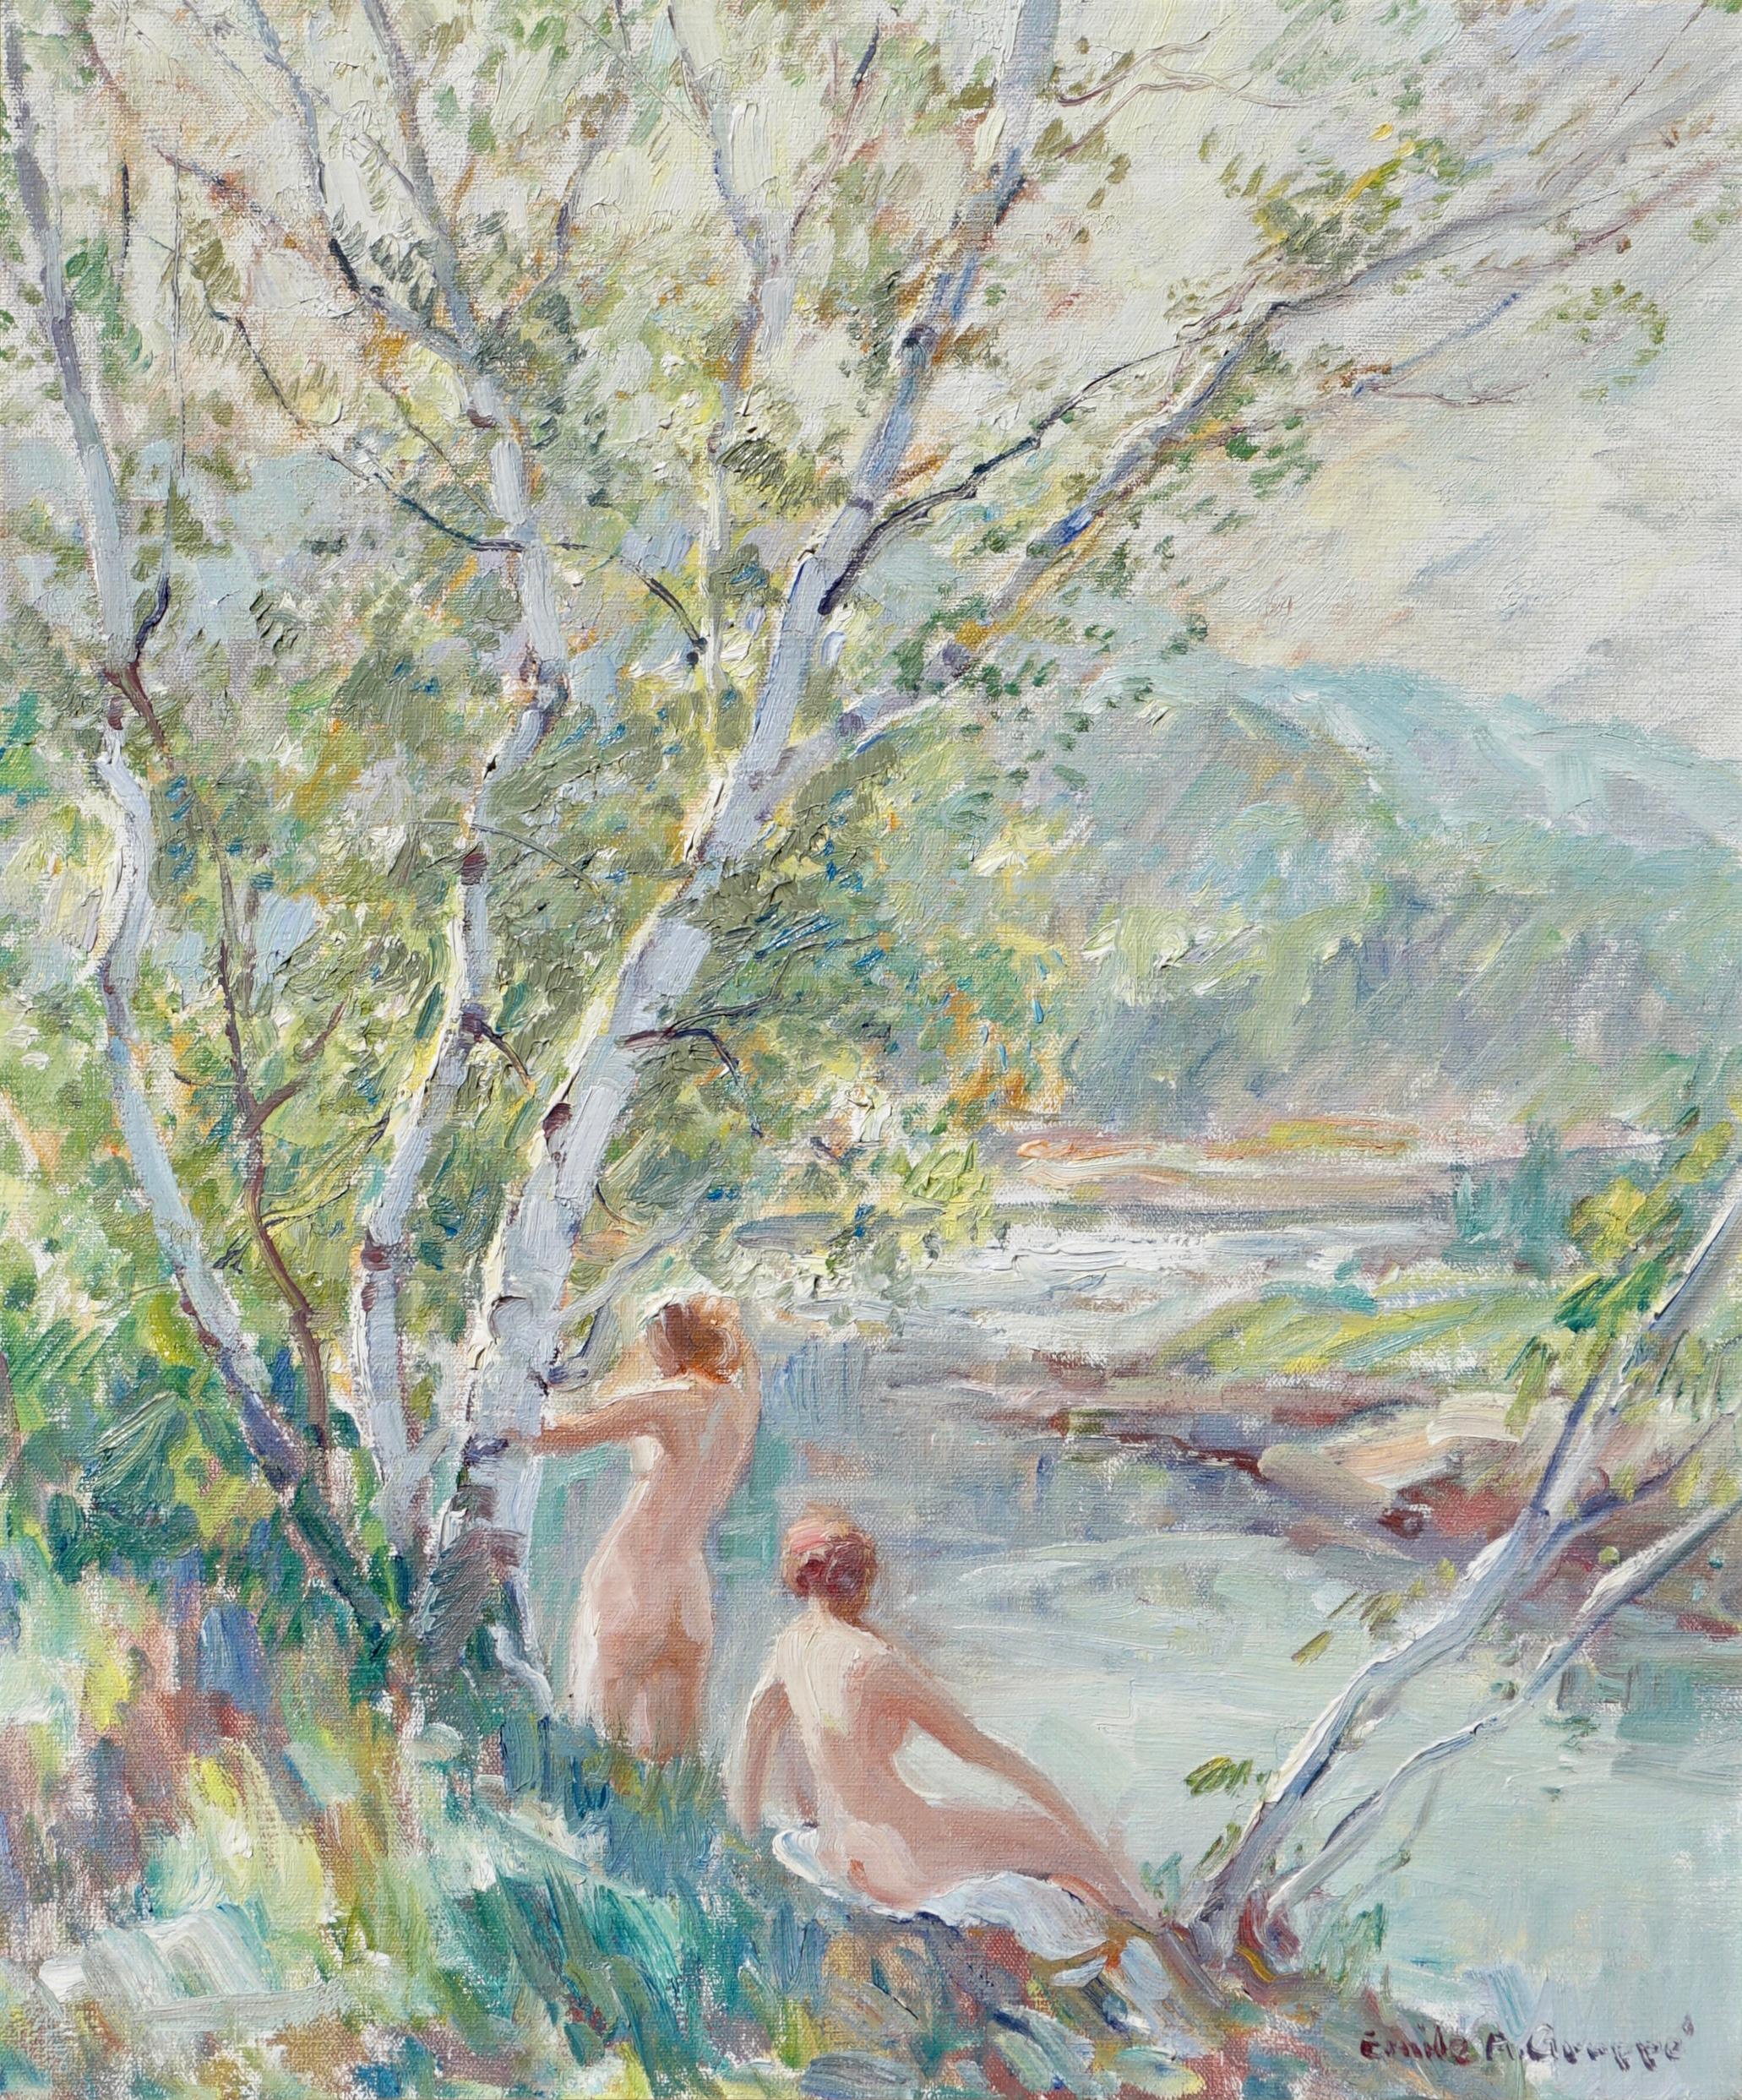 An absolutely amazing post Impressionist painting with a cascade of bright colors showing nudes by a riverside with birch trees in the foreground and mountains in the background. Emile Gruppe turned out countless paintings so when you find a diamond